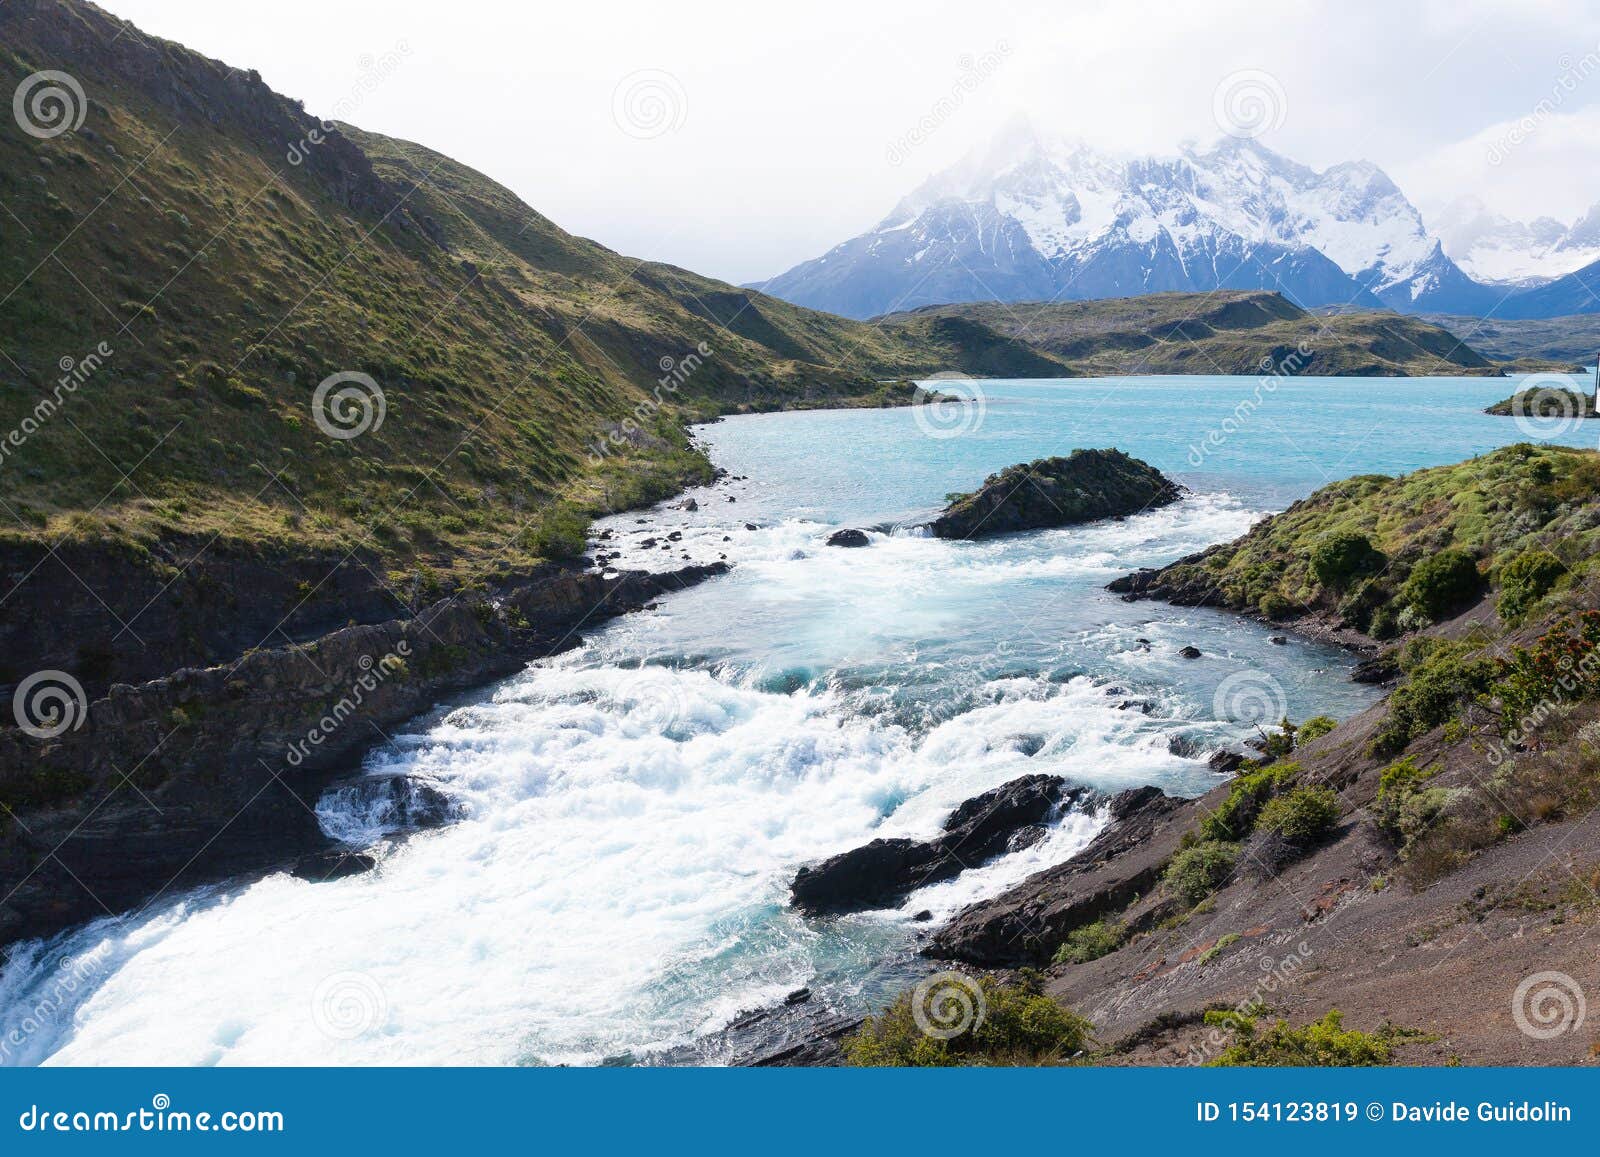 Salto Chico Waterfall View, Torres Del Paine, Chile Stock Image - Image ...